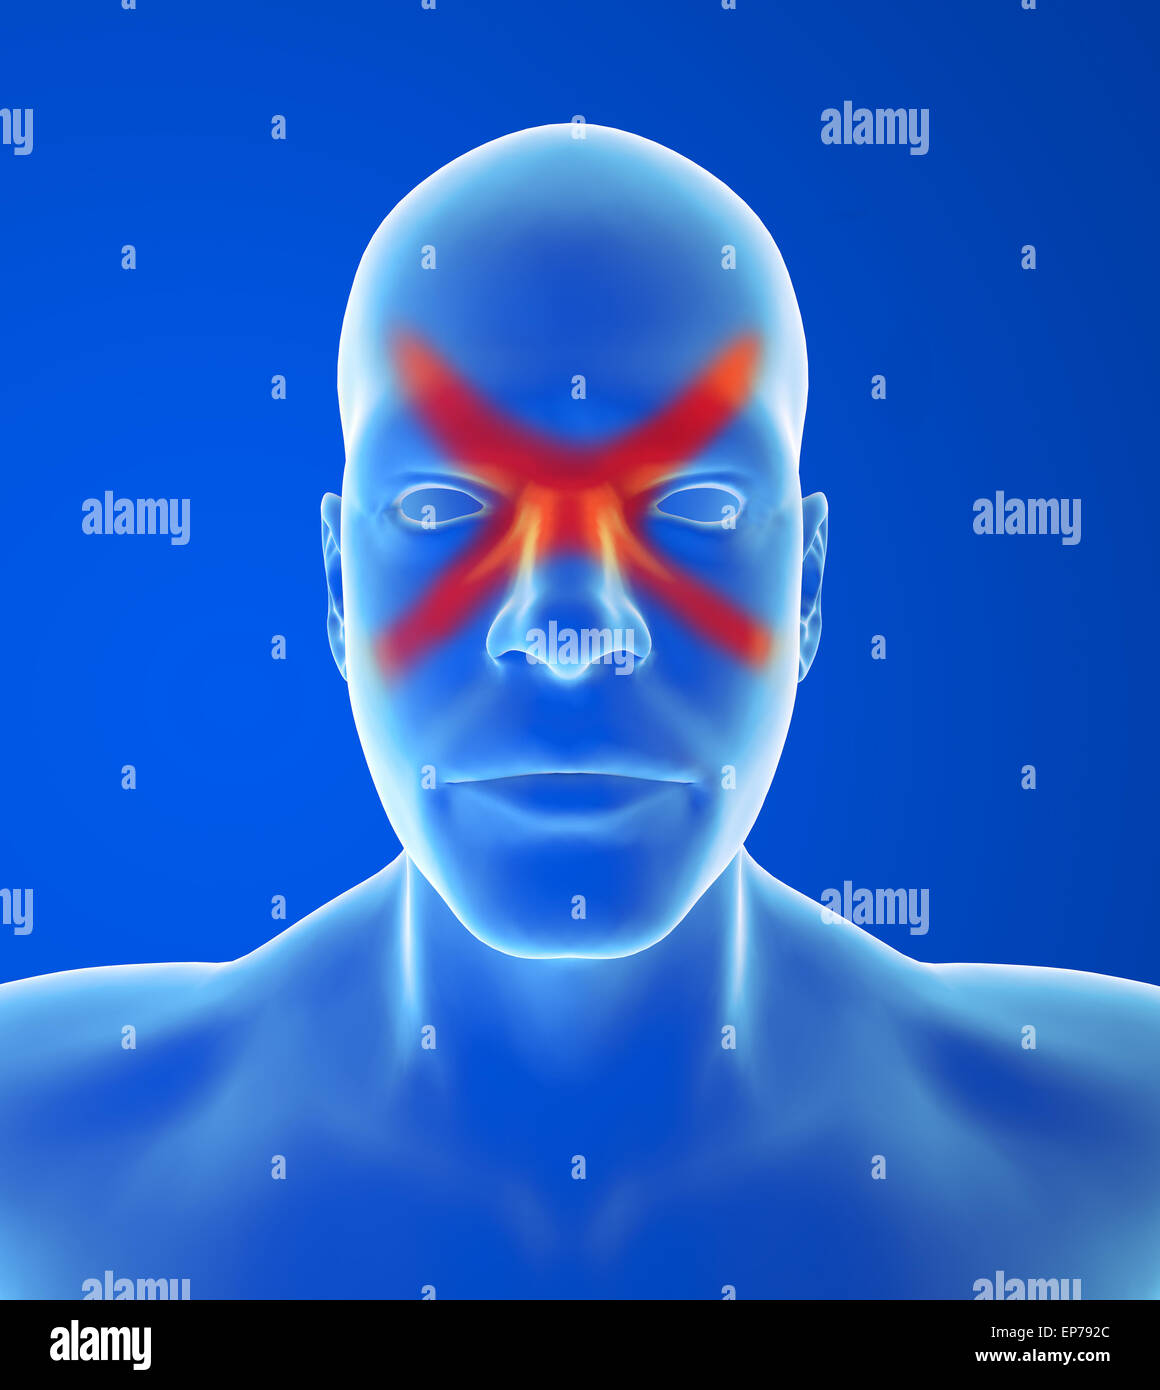 Type headache: Sinus pain is usually behind the forehead and cheekbones on blue background Stock Photo